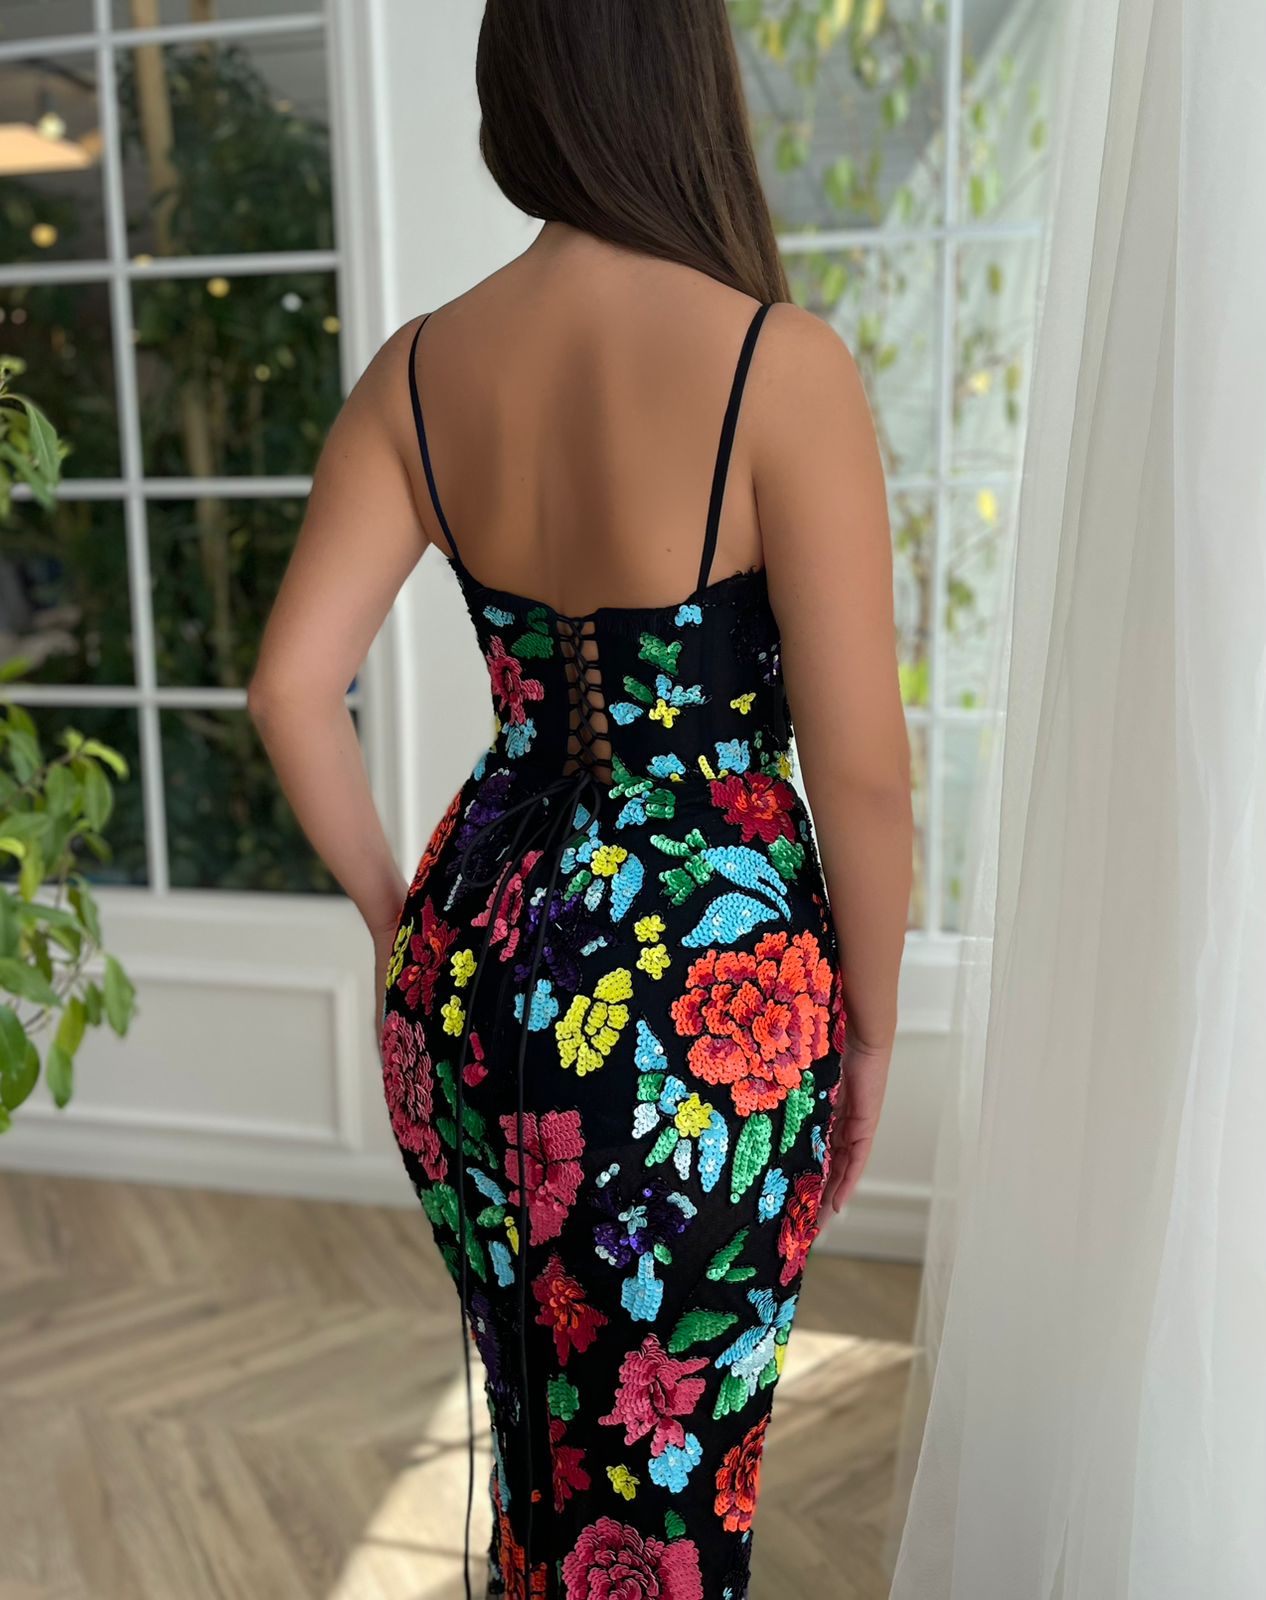 Black mermaid dress with colorful floral embroidery and spaghetti straps